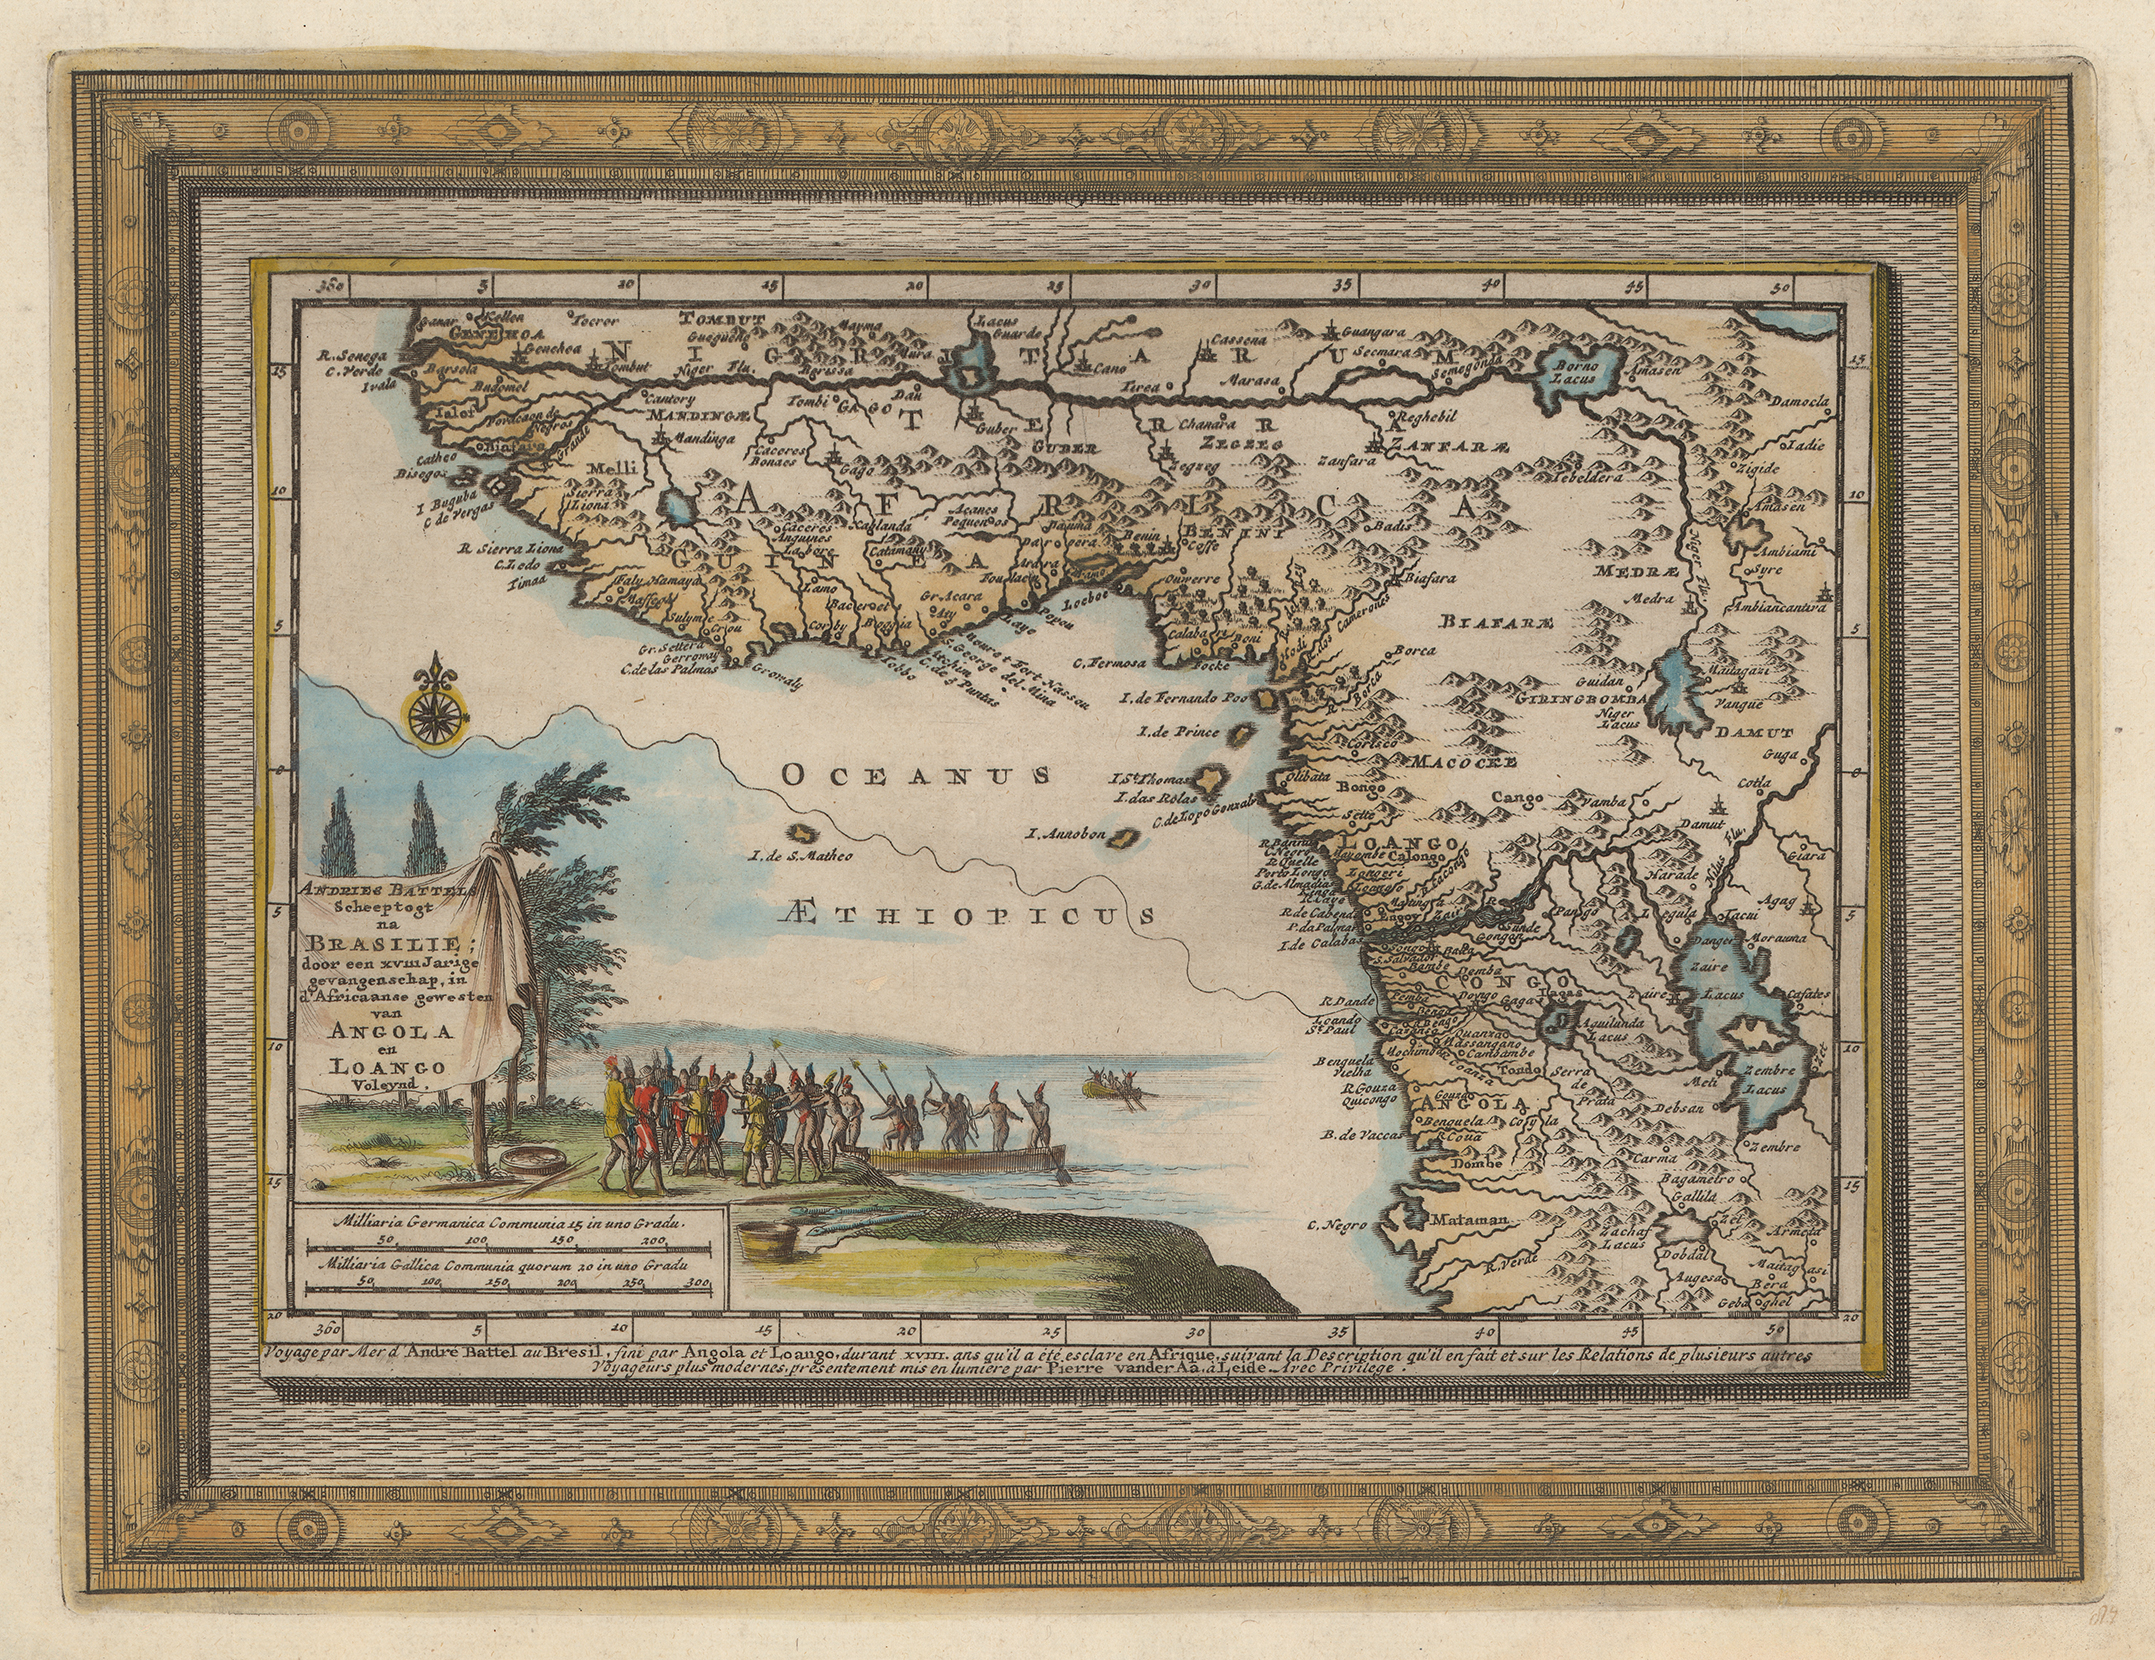 A map depicting the western shore of Africa, with artwork depicting African and European men in conflict and a legend. 